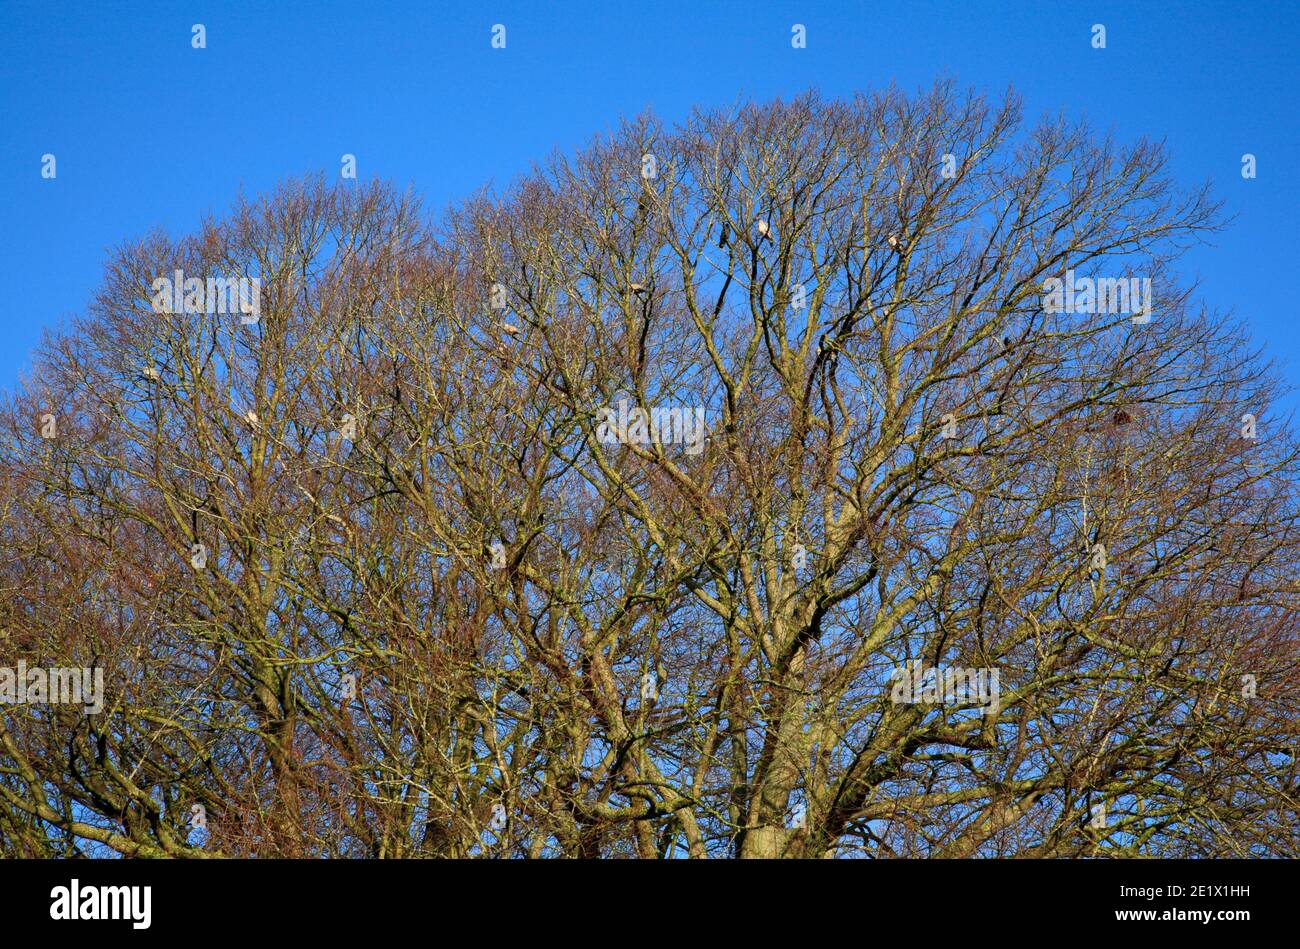 A view of Beech tree canopies in winter with resting Woodpigeons against a blue sky at Hellesdon, Norfolk, England, United Kingdom. Stock Photo